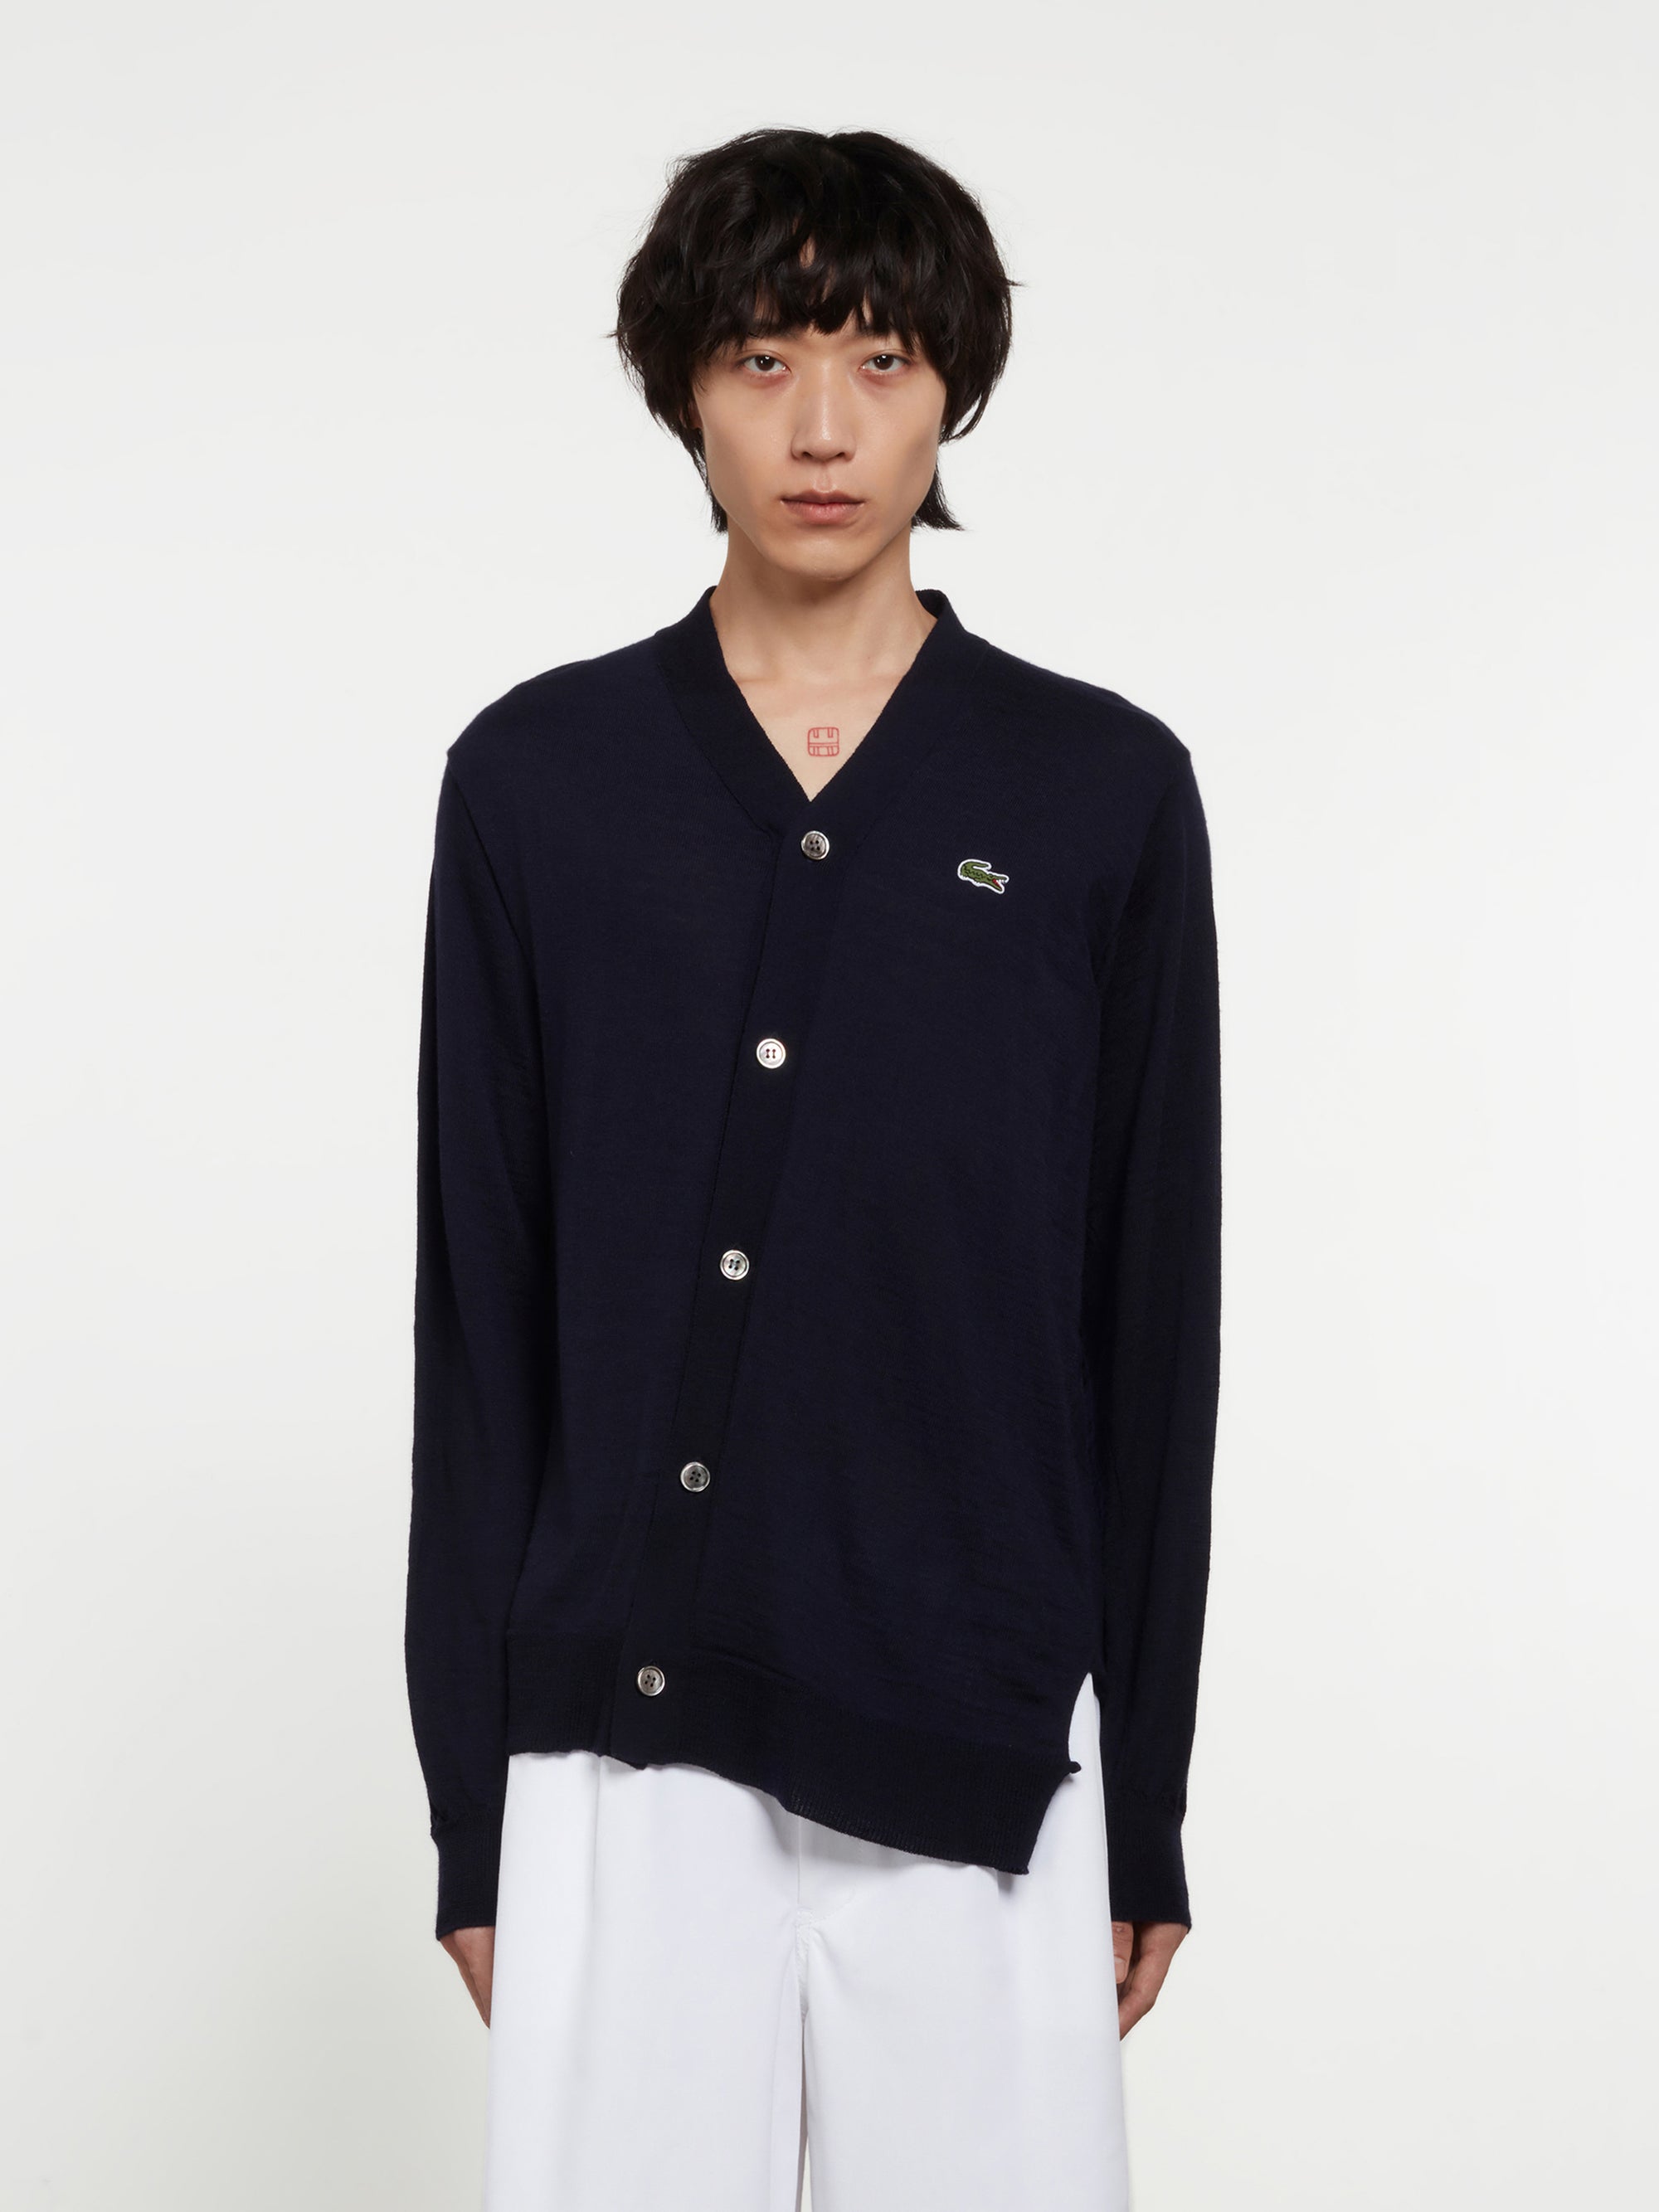 CDG Shirt - Lacoste Knit Cardigan - (Navy) view 1